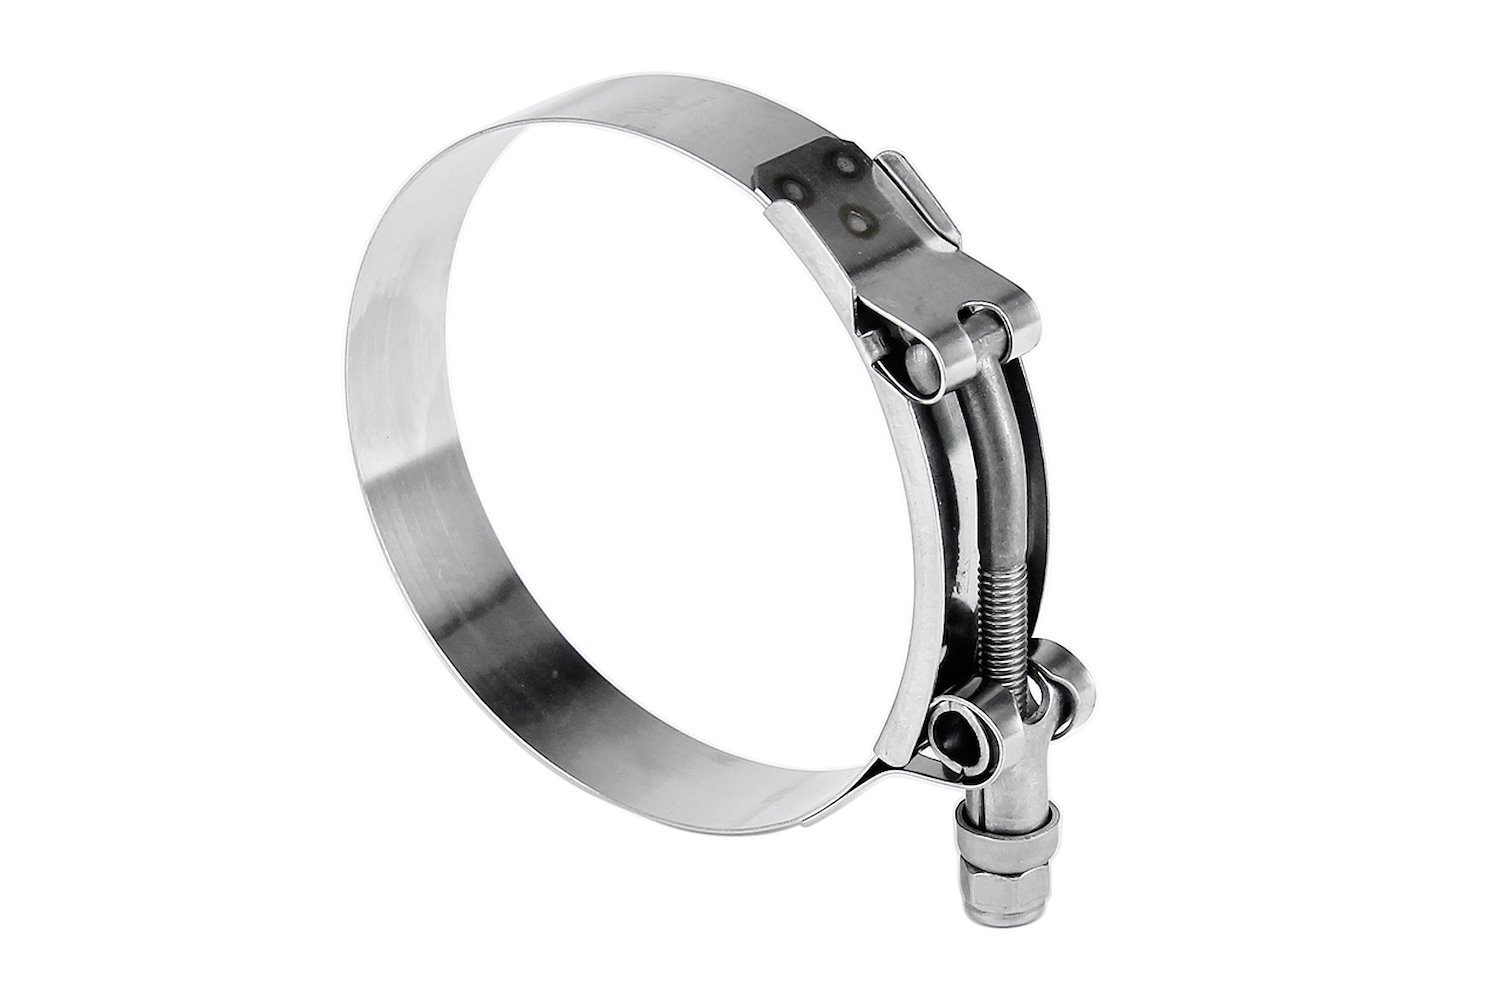 316-SSTC-51-59 100-Percent Marine Grade Stainless Steel T-Bolt Hose Clamp, Size #36, Range: 2 in.- 2.32 in.